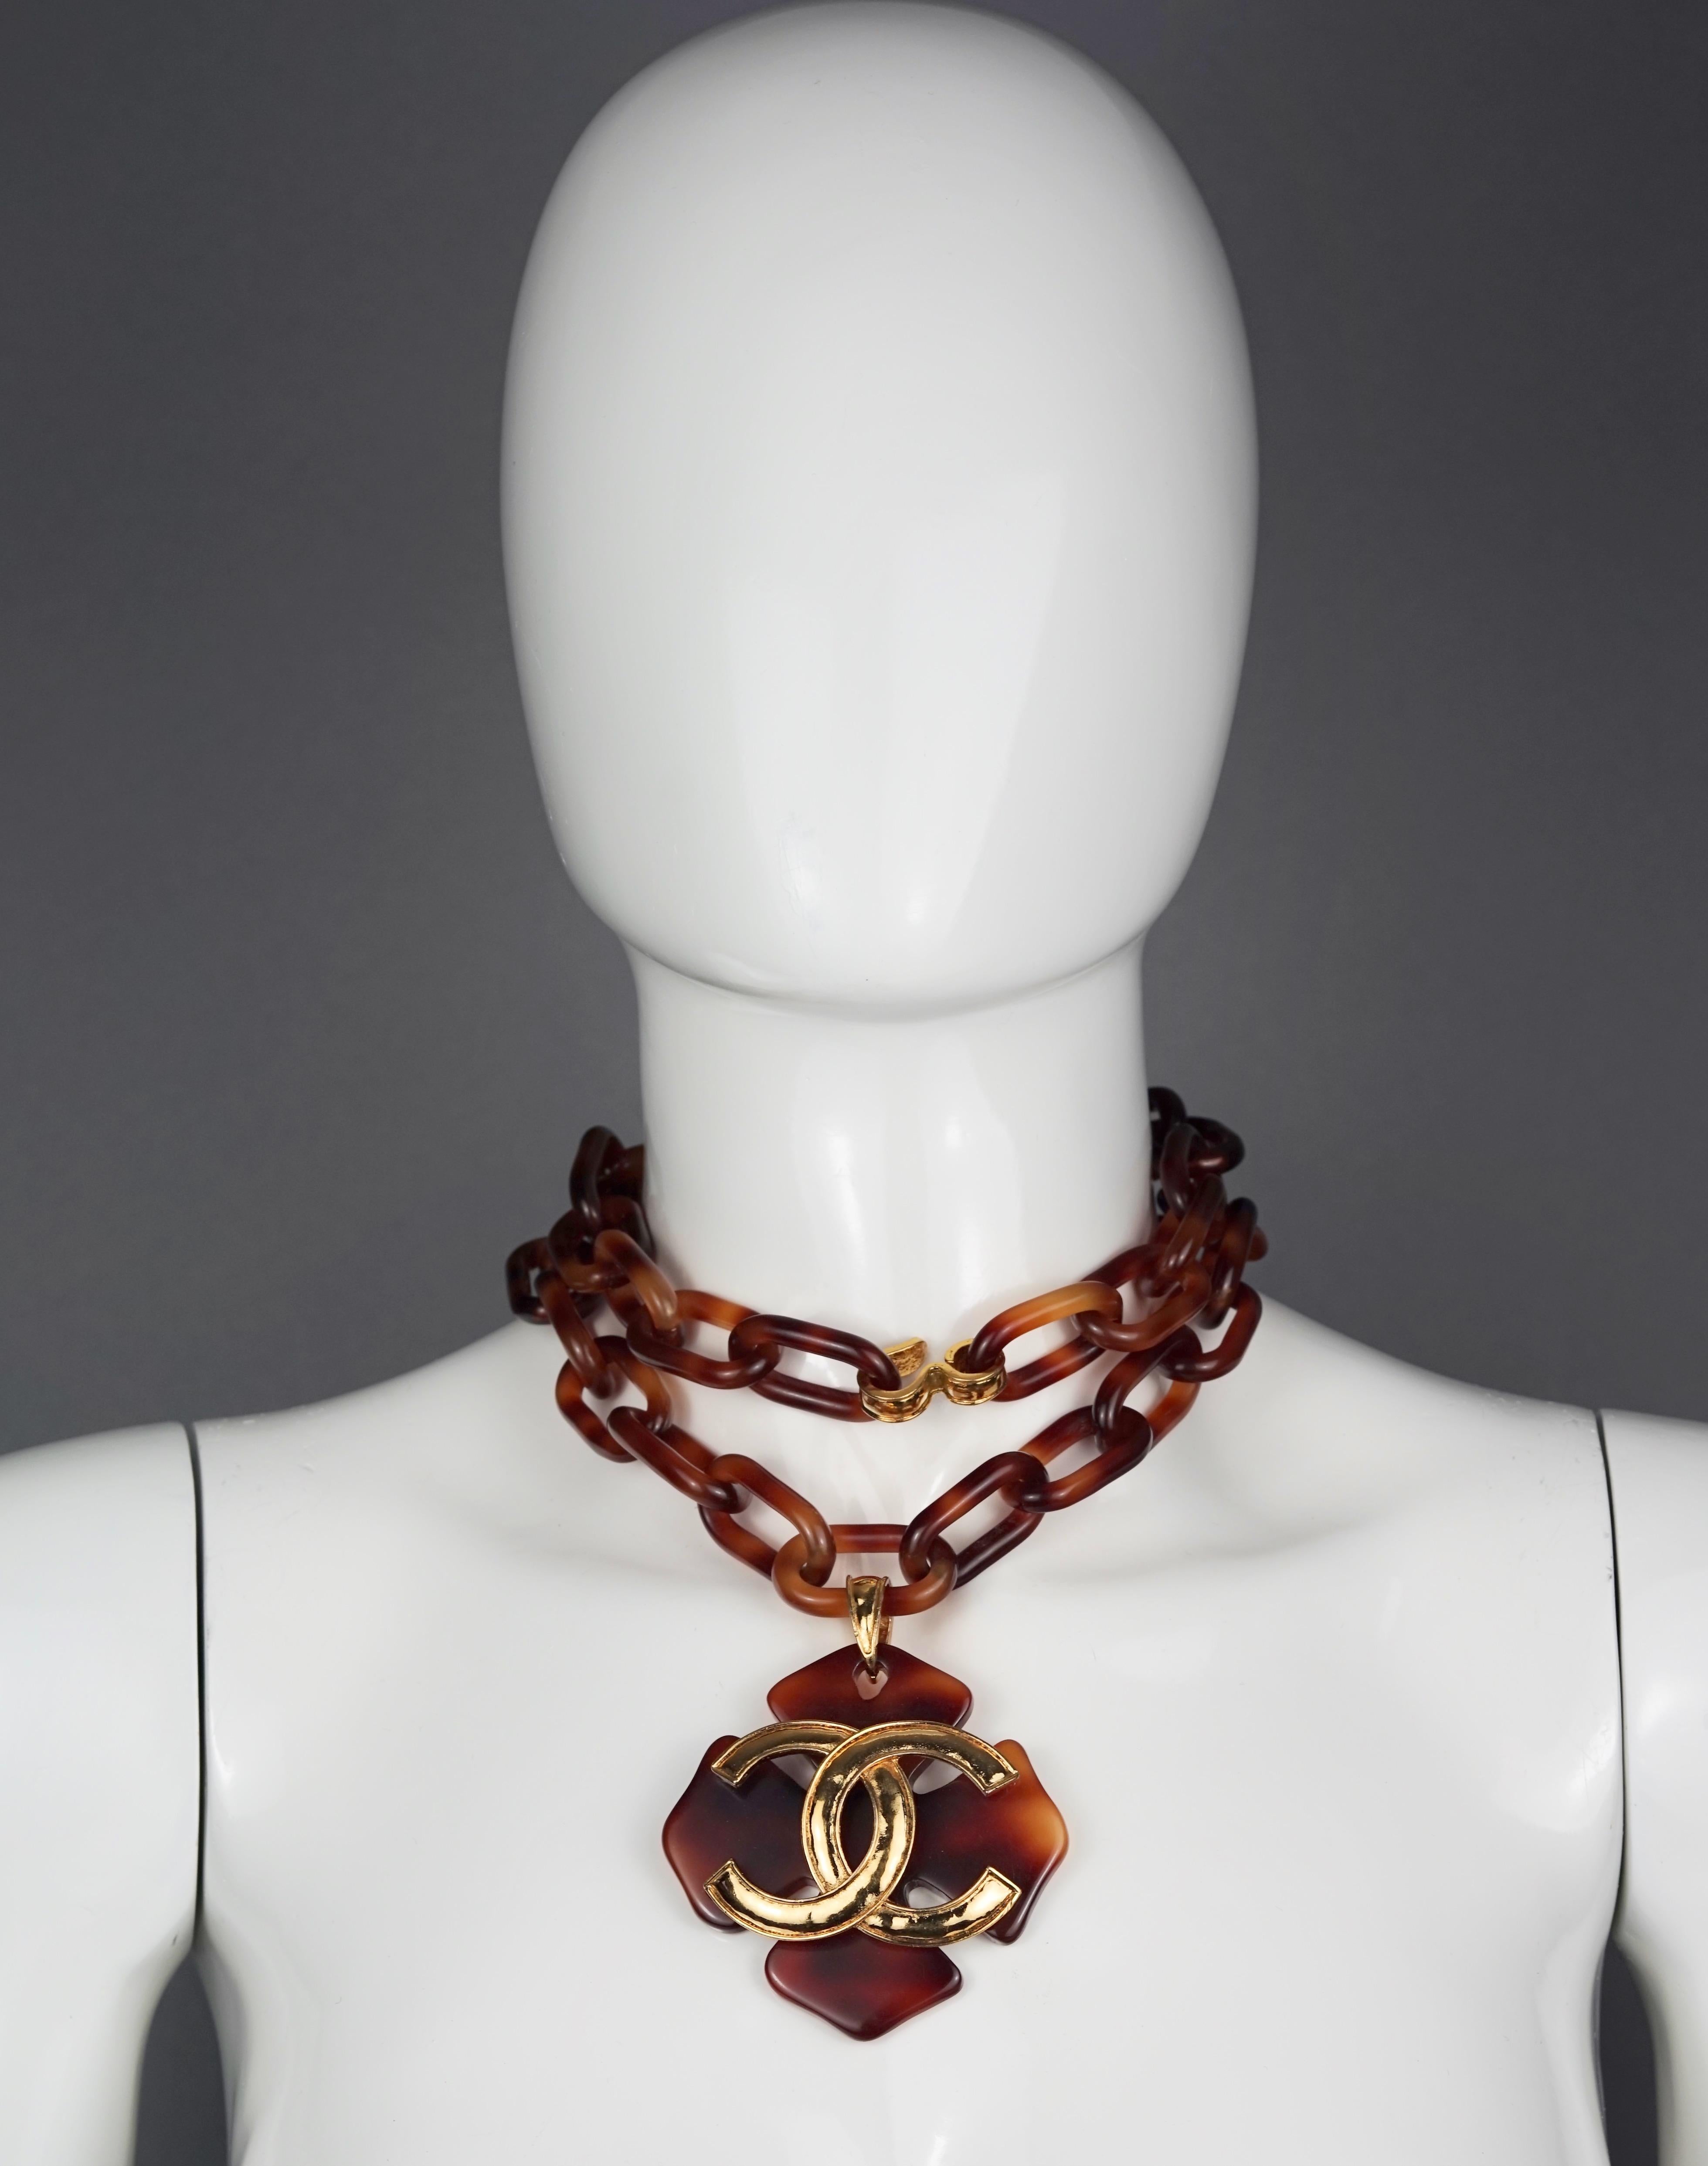 Vintage 1994 CHANEL Jumbo Logo Maltese Cross Tortoiseshell Necklace

Measurements:
Pendant Height: 3.15 inches (8 cm)
Chain Height: 0.78 inch (2 cm)
Wearable Length: 33.07 inches (84 cm) adjustable

Features:
- 100% Authentic CHANEL.
- Lucite faux